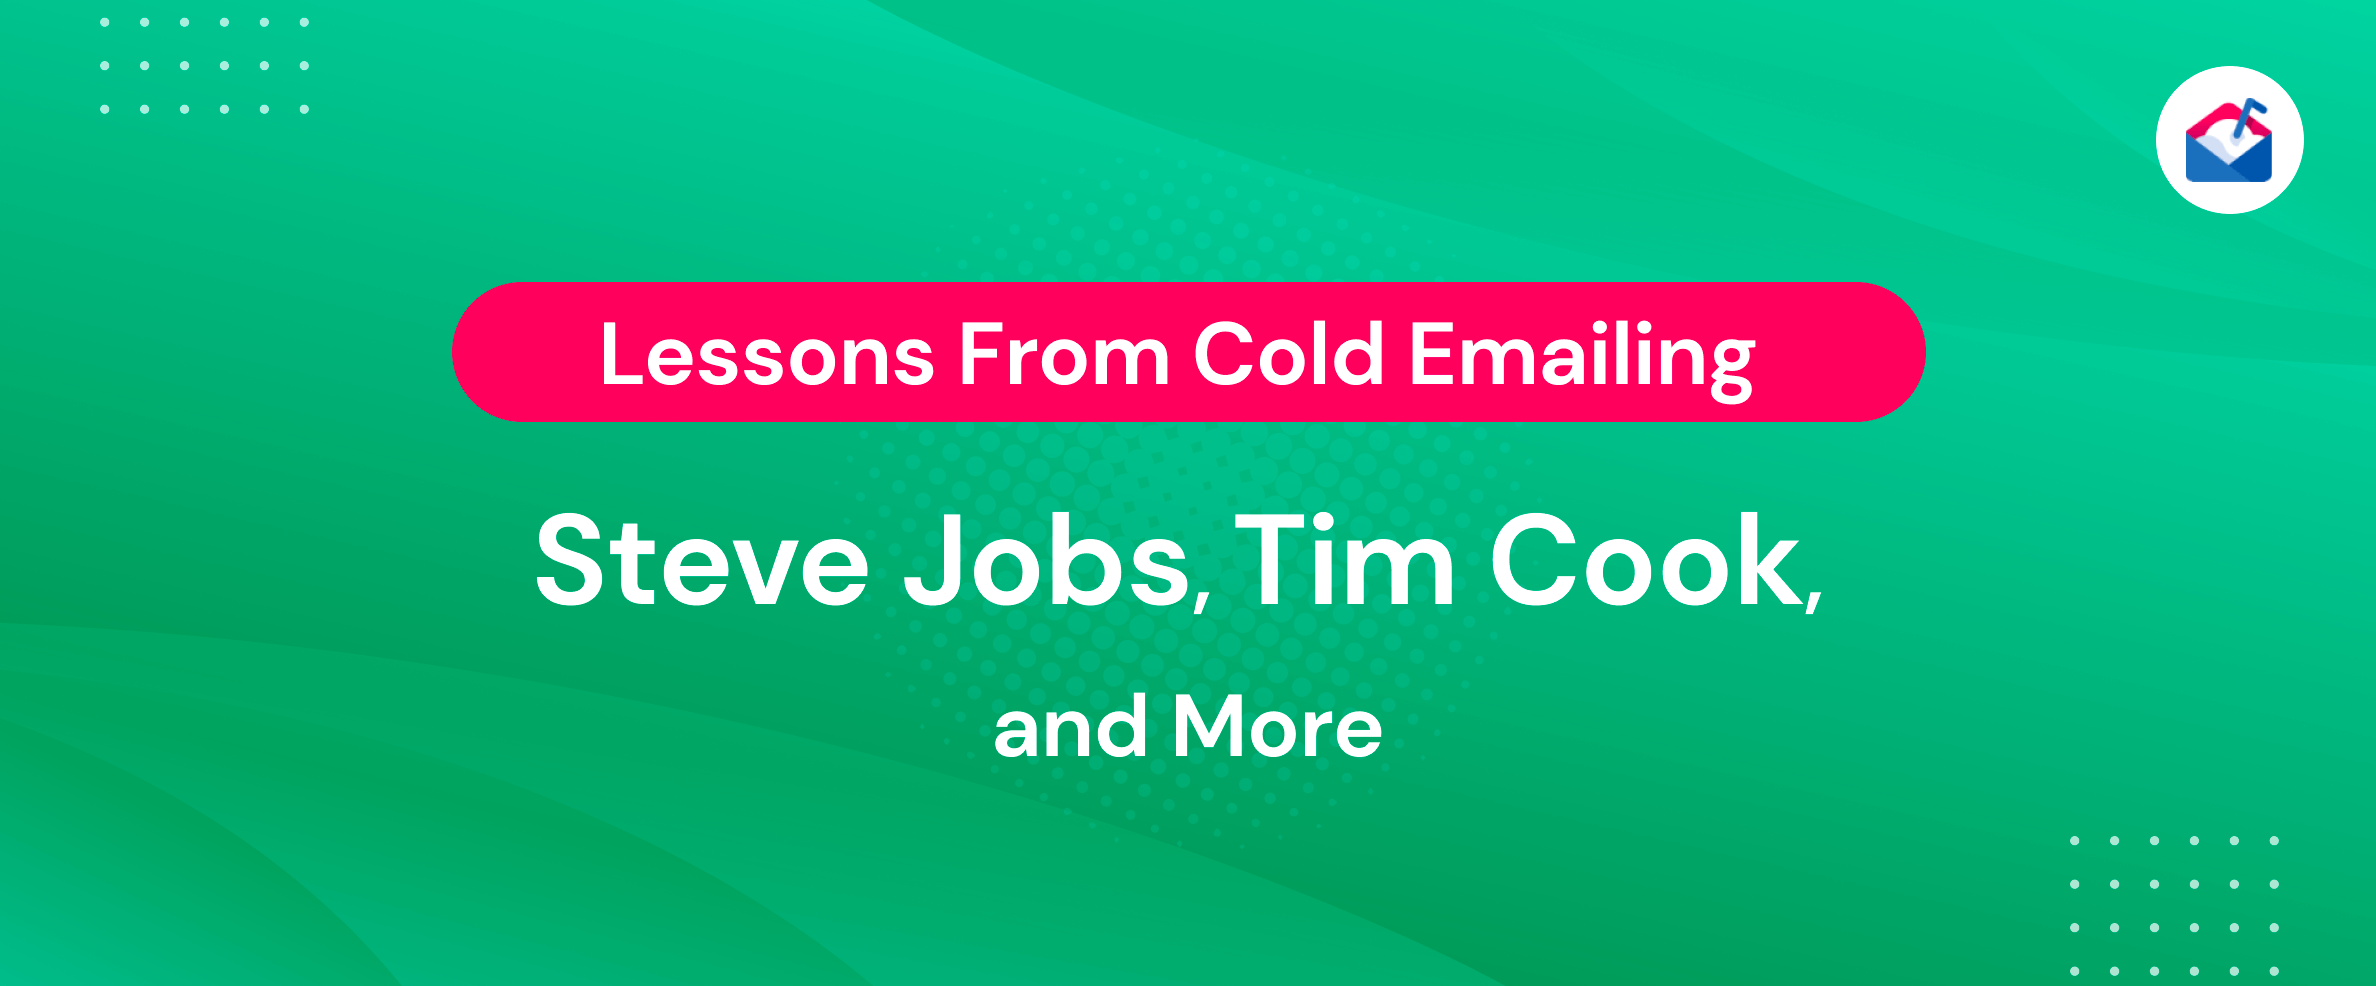 Lessons from Cold Emailing Steve Jobs, Tim Cook, and More